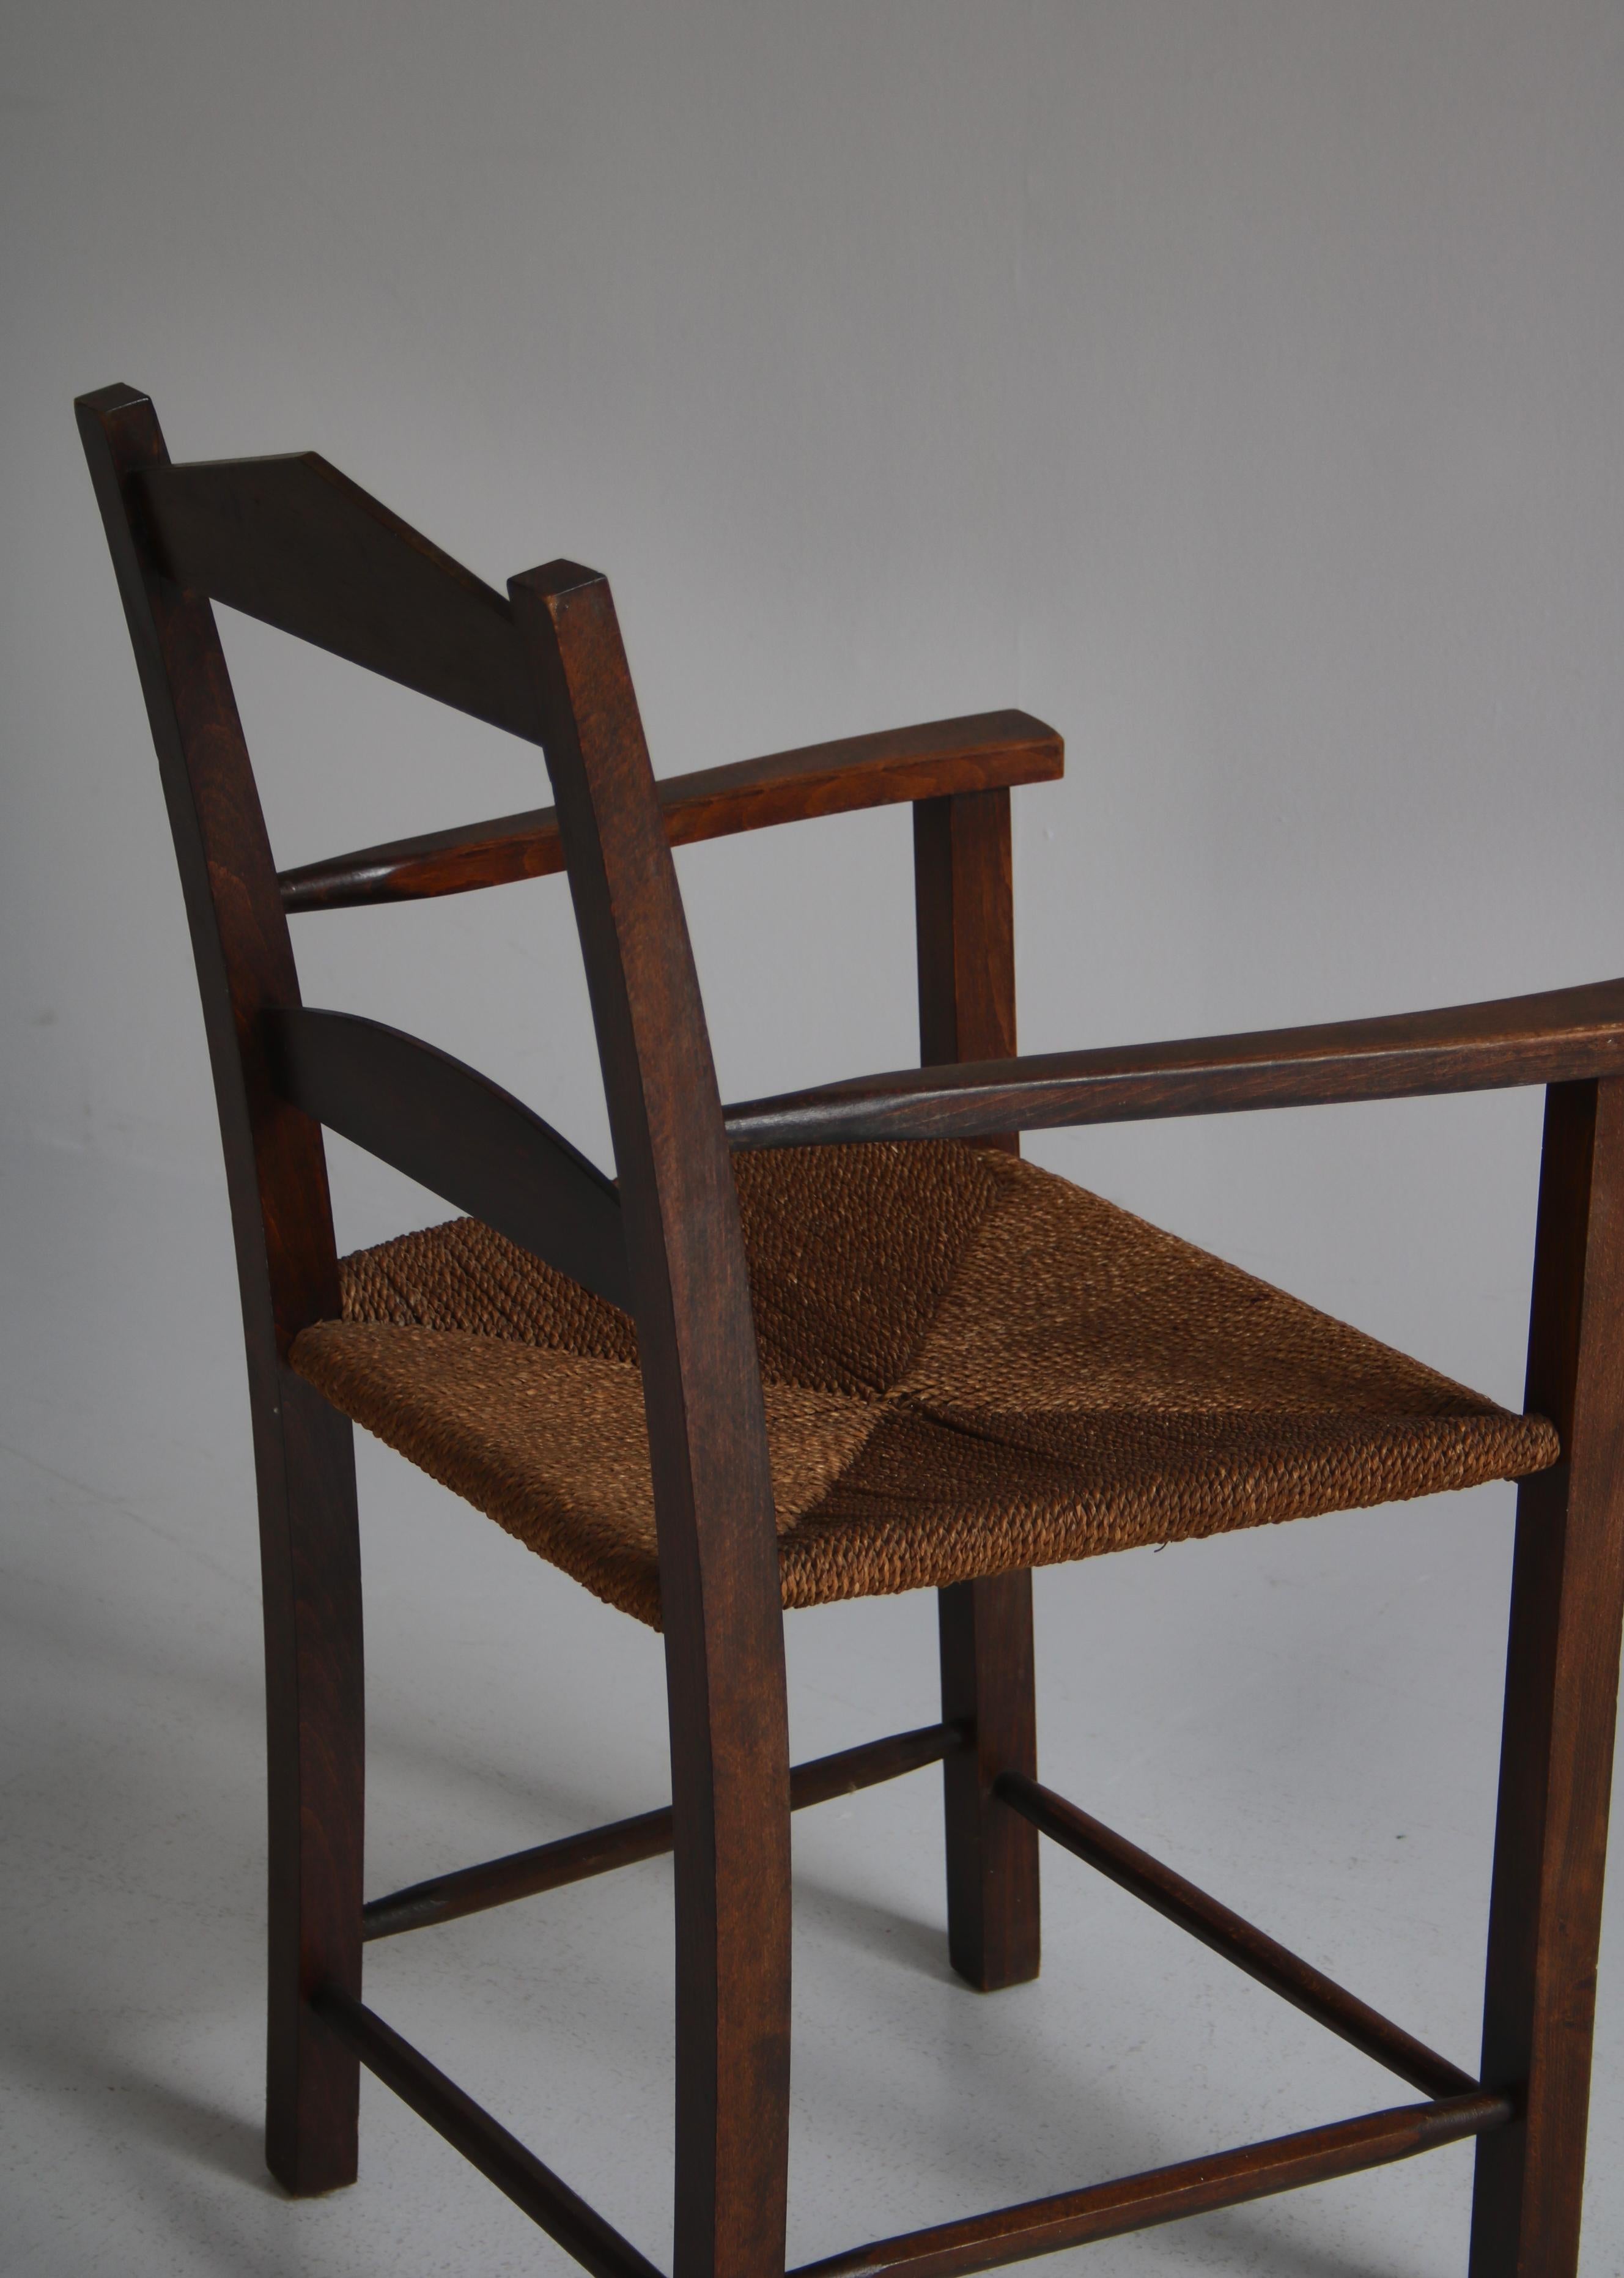 Pair of Armchairs in Dark Stained Pine and Seagrass Danish Cabinetmaker, 1940s For Sale 2